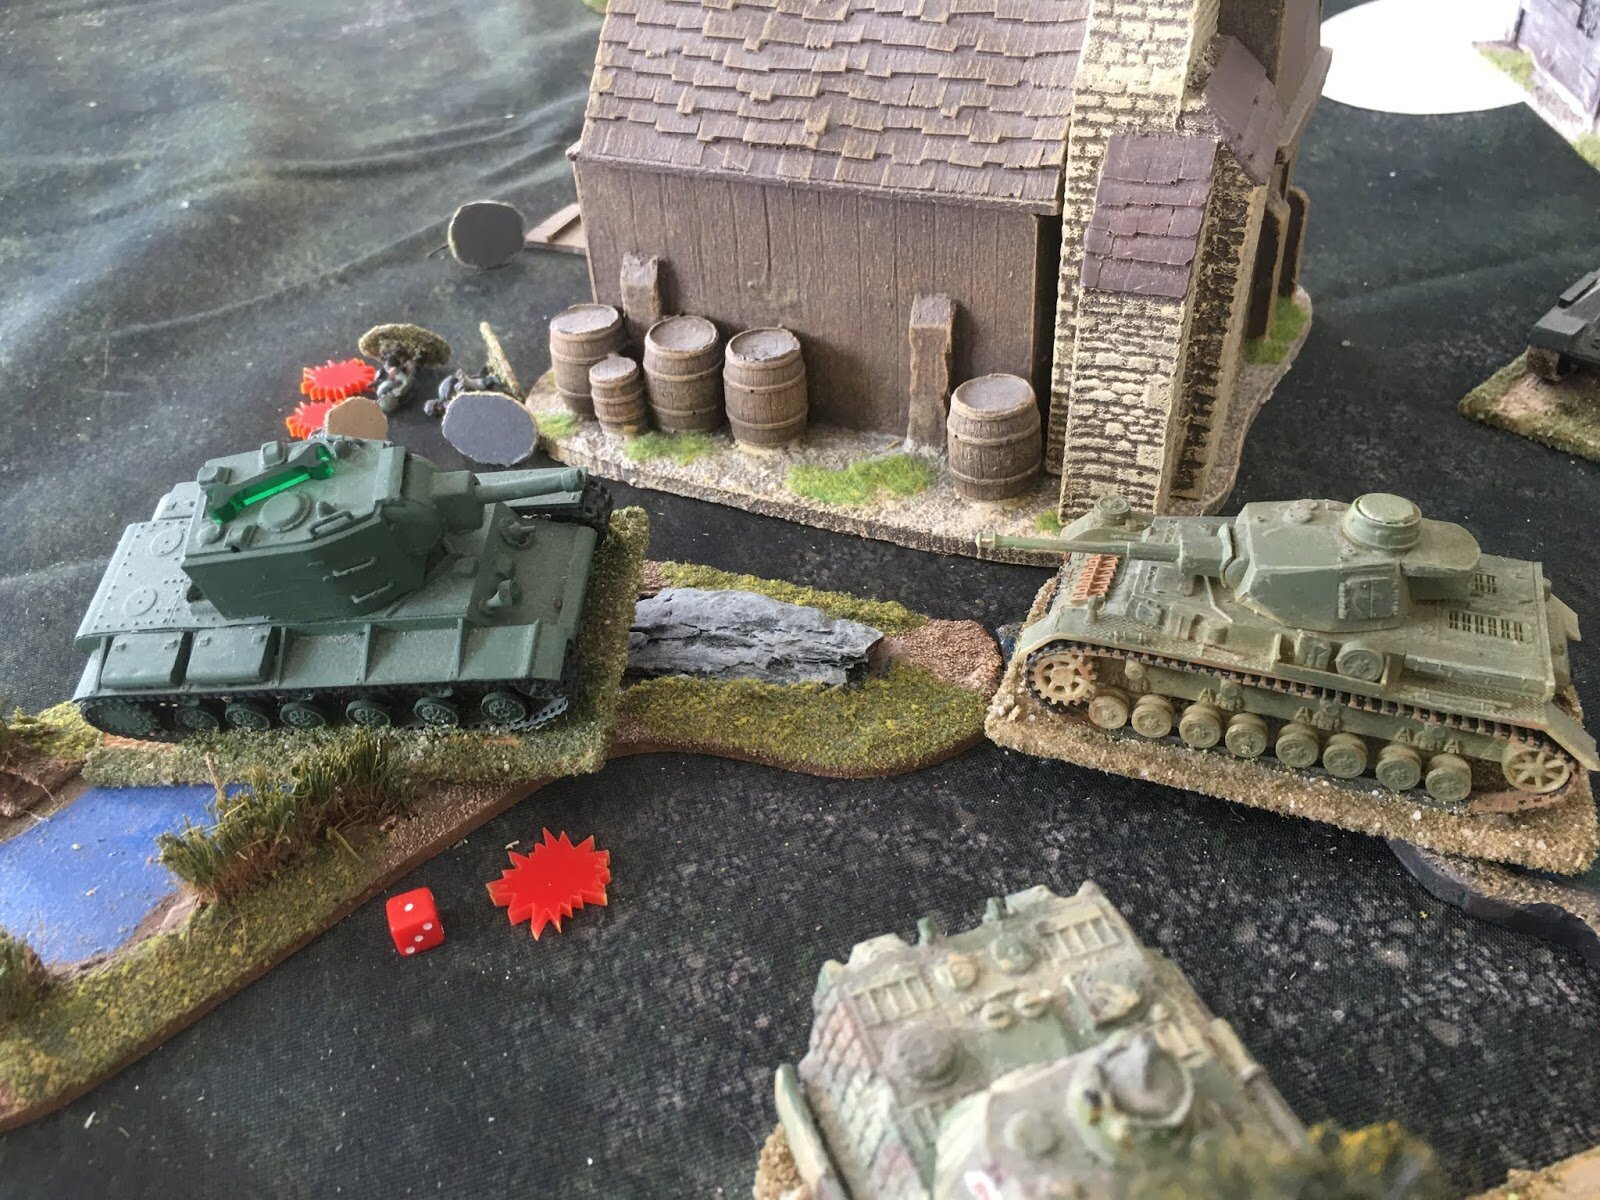 The Germans have hurt the enemy big tank but it is still in action